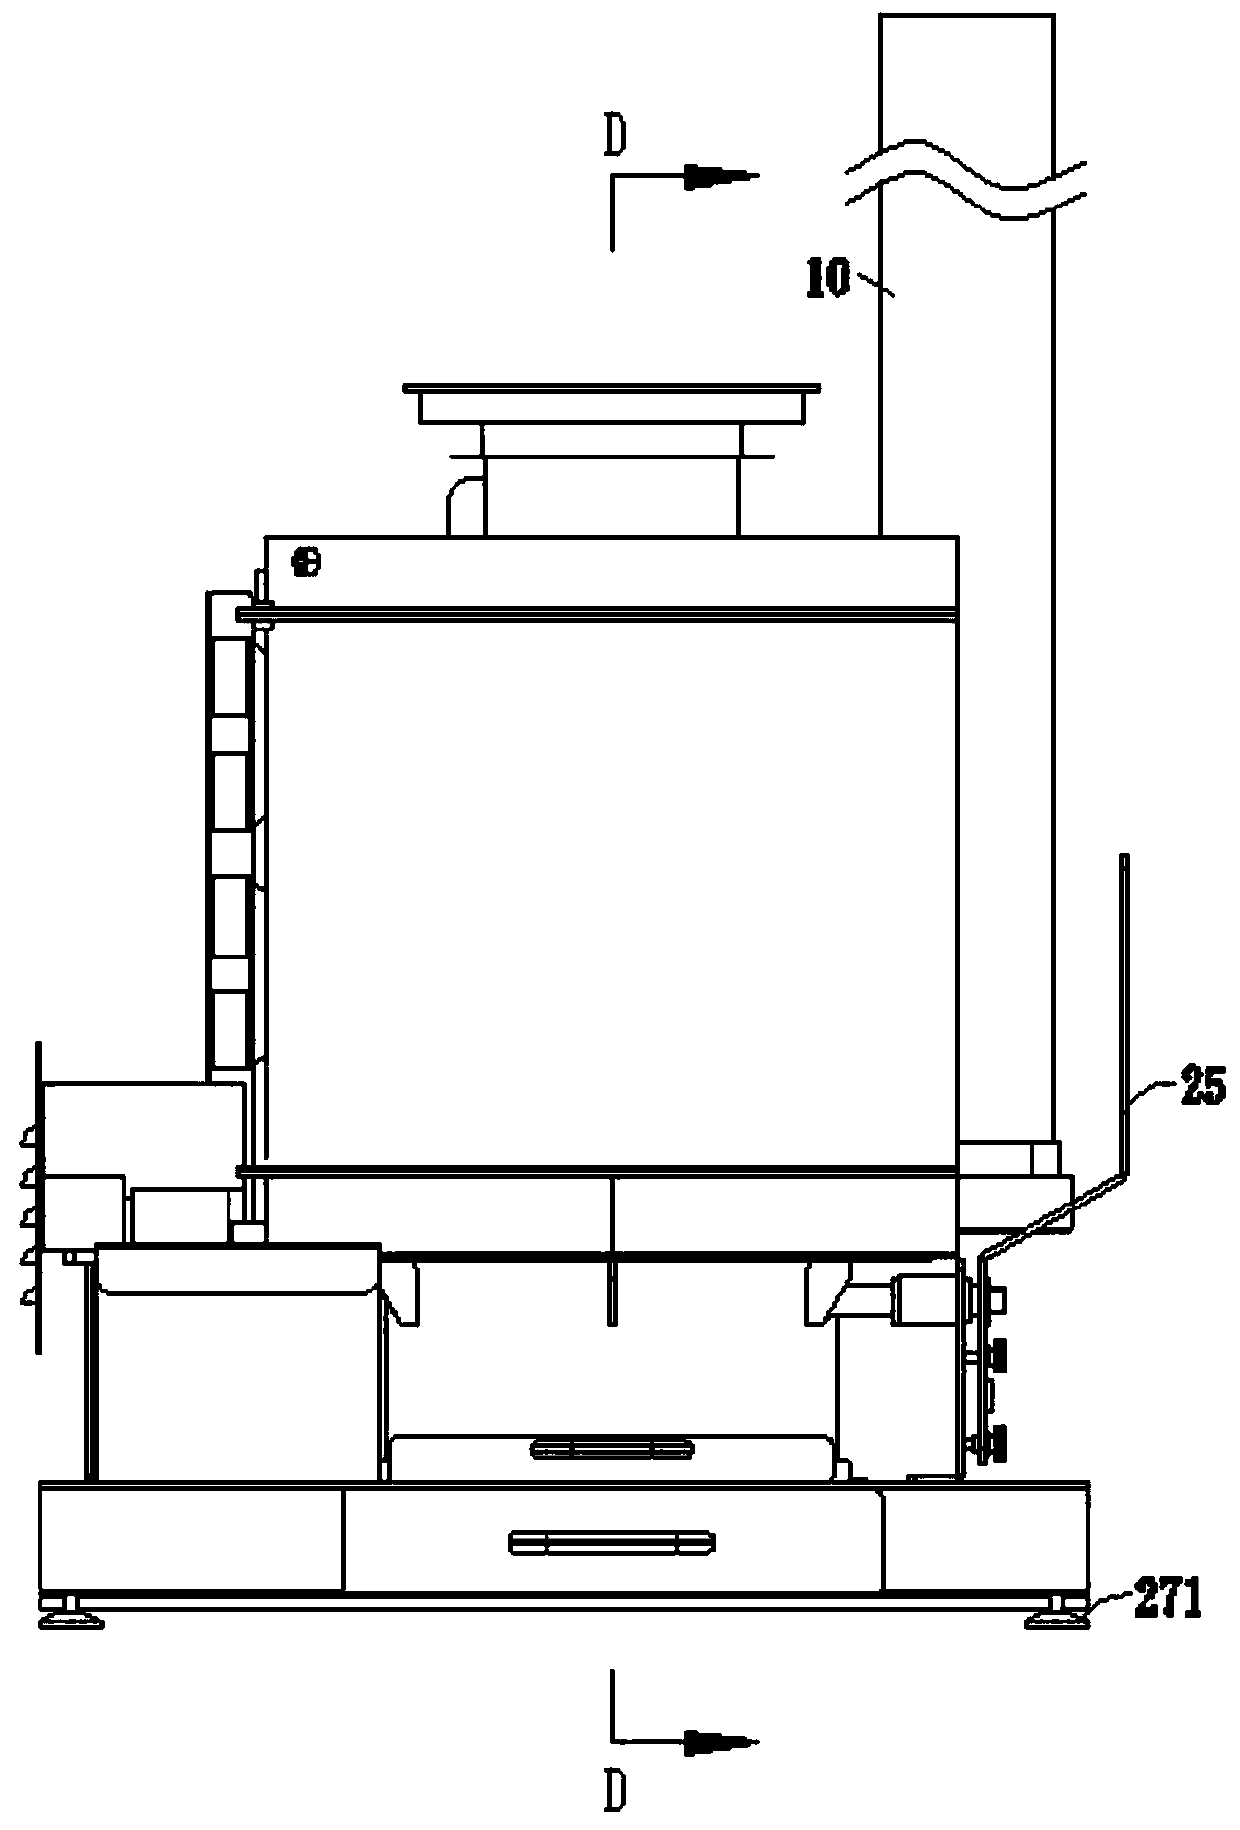 Heating device using solid fuels